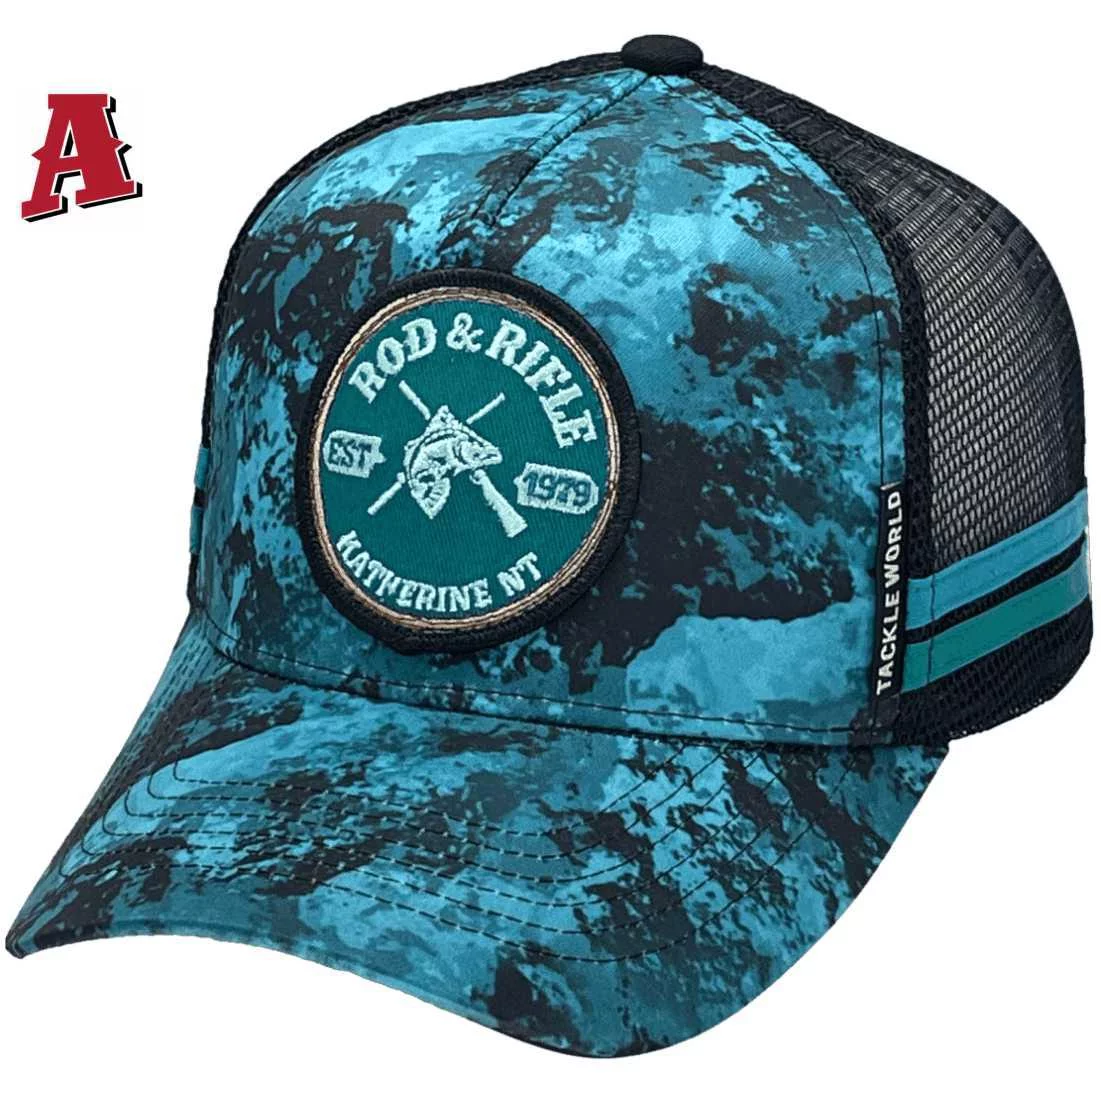 Rod and Rifle Tackleworld Katherine NT LP Midrange Aussie Trucker Hat with Australian Head Fit Crown and 2 Side Bands Camo Substrate Sky Subdued